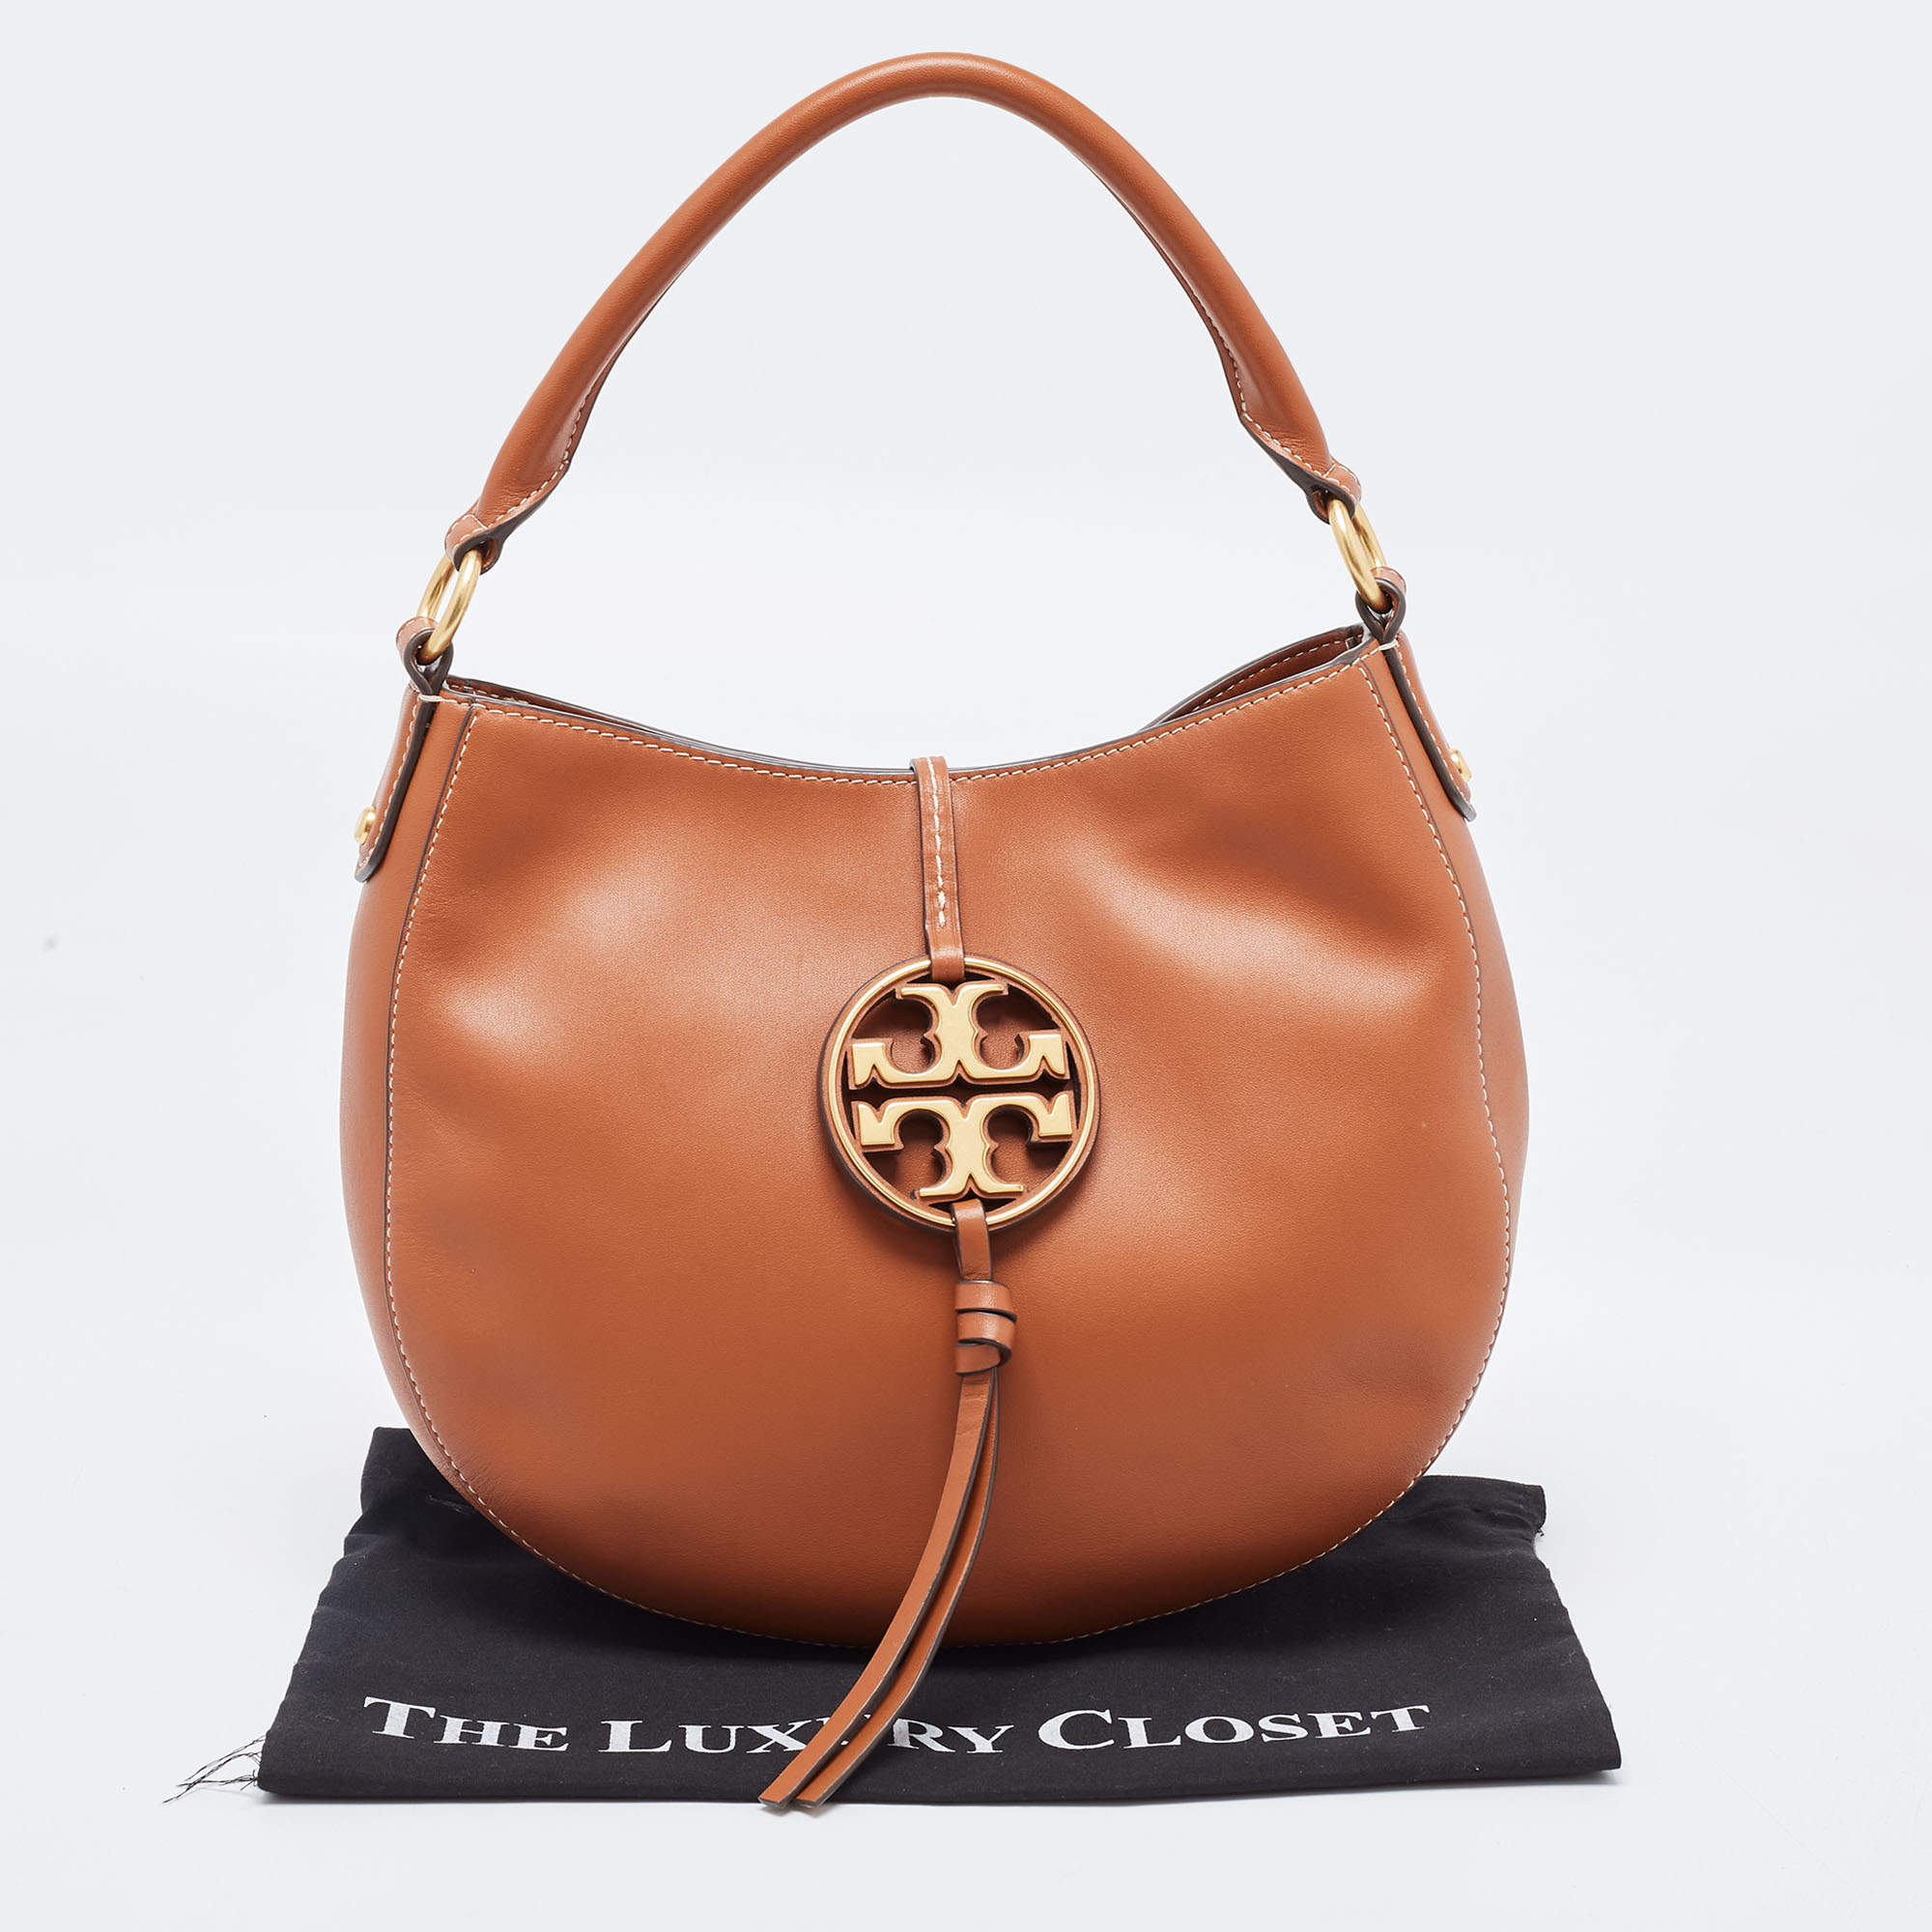 Auth TORY BURCH Brown Leather Shoulder Bag